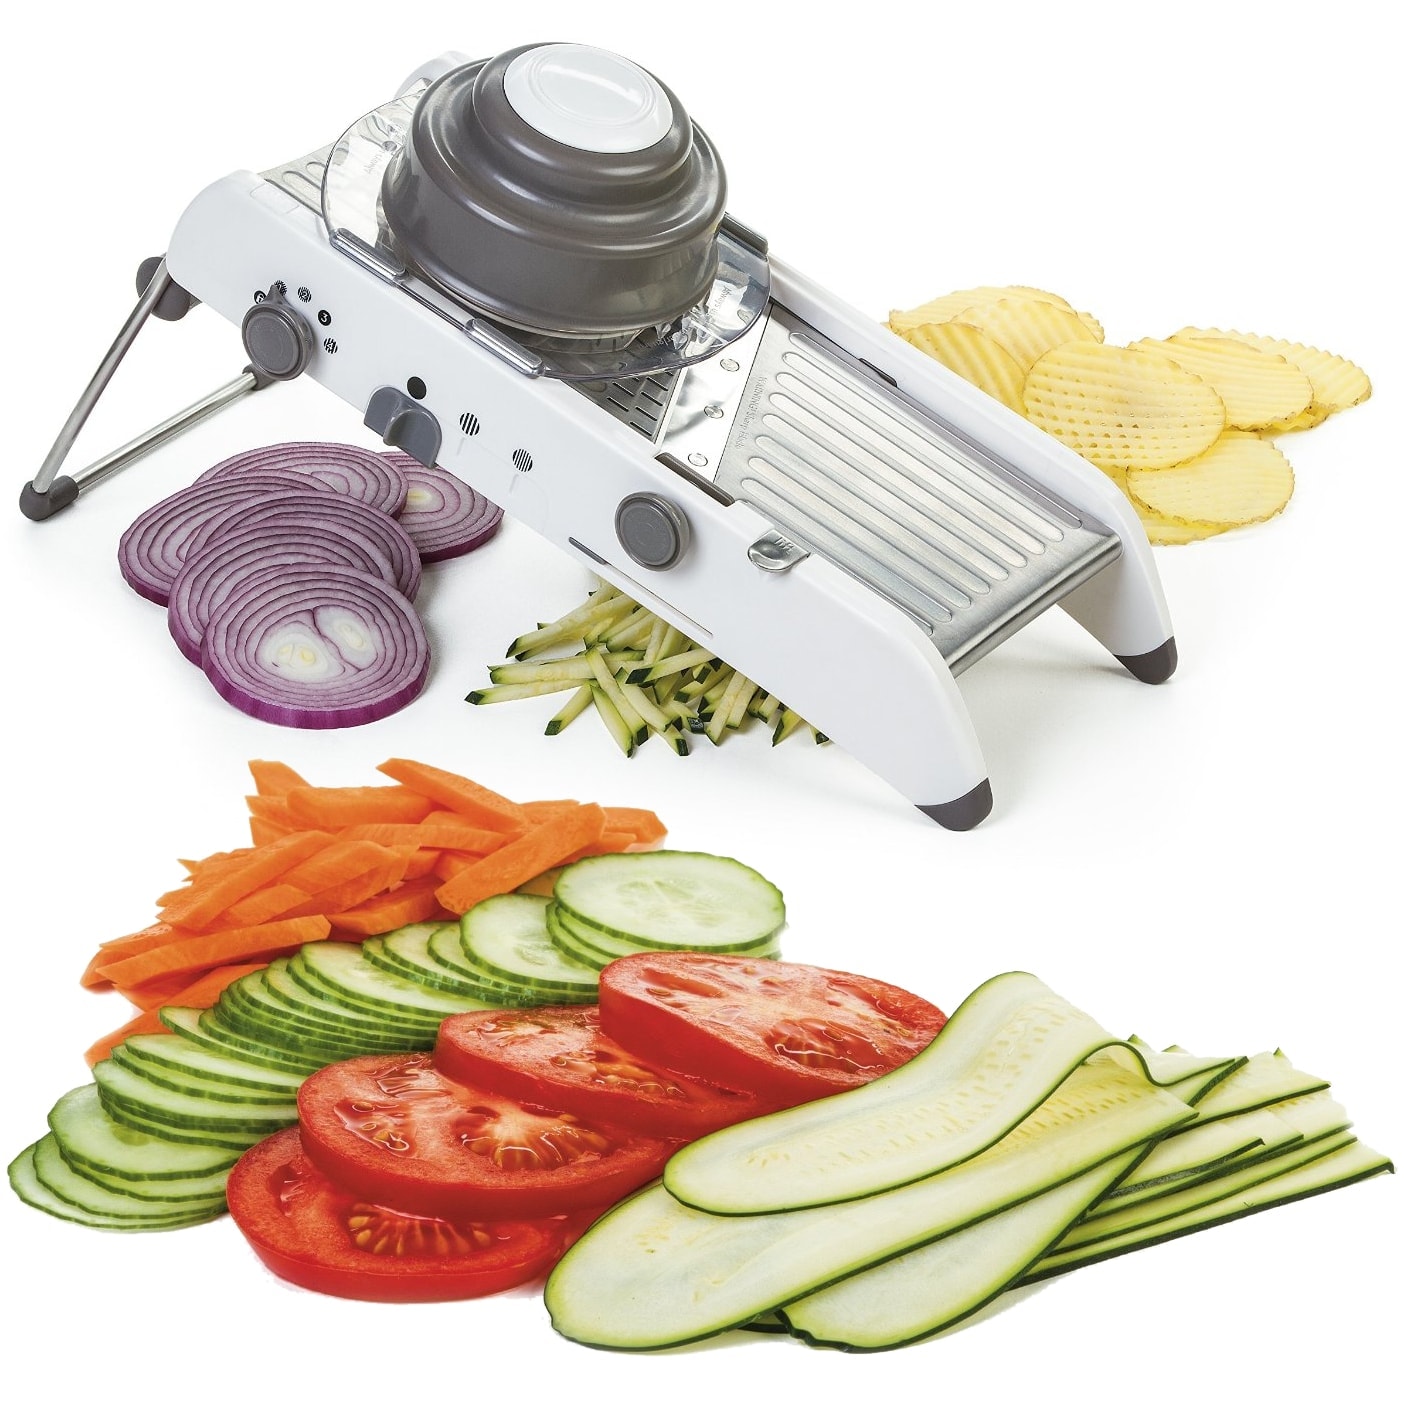 What is a Mandoline? How is it Used in Cooking?